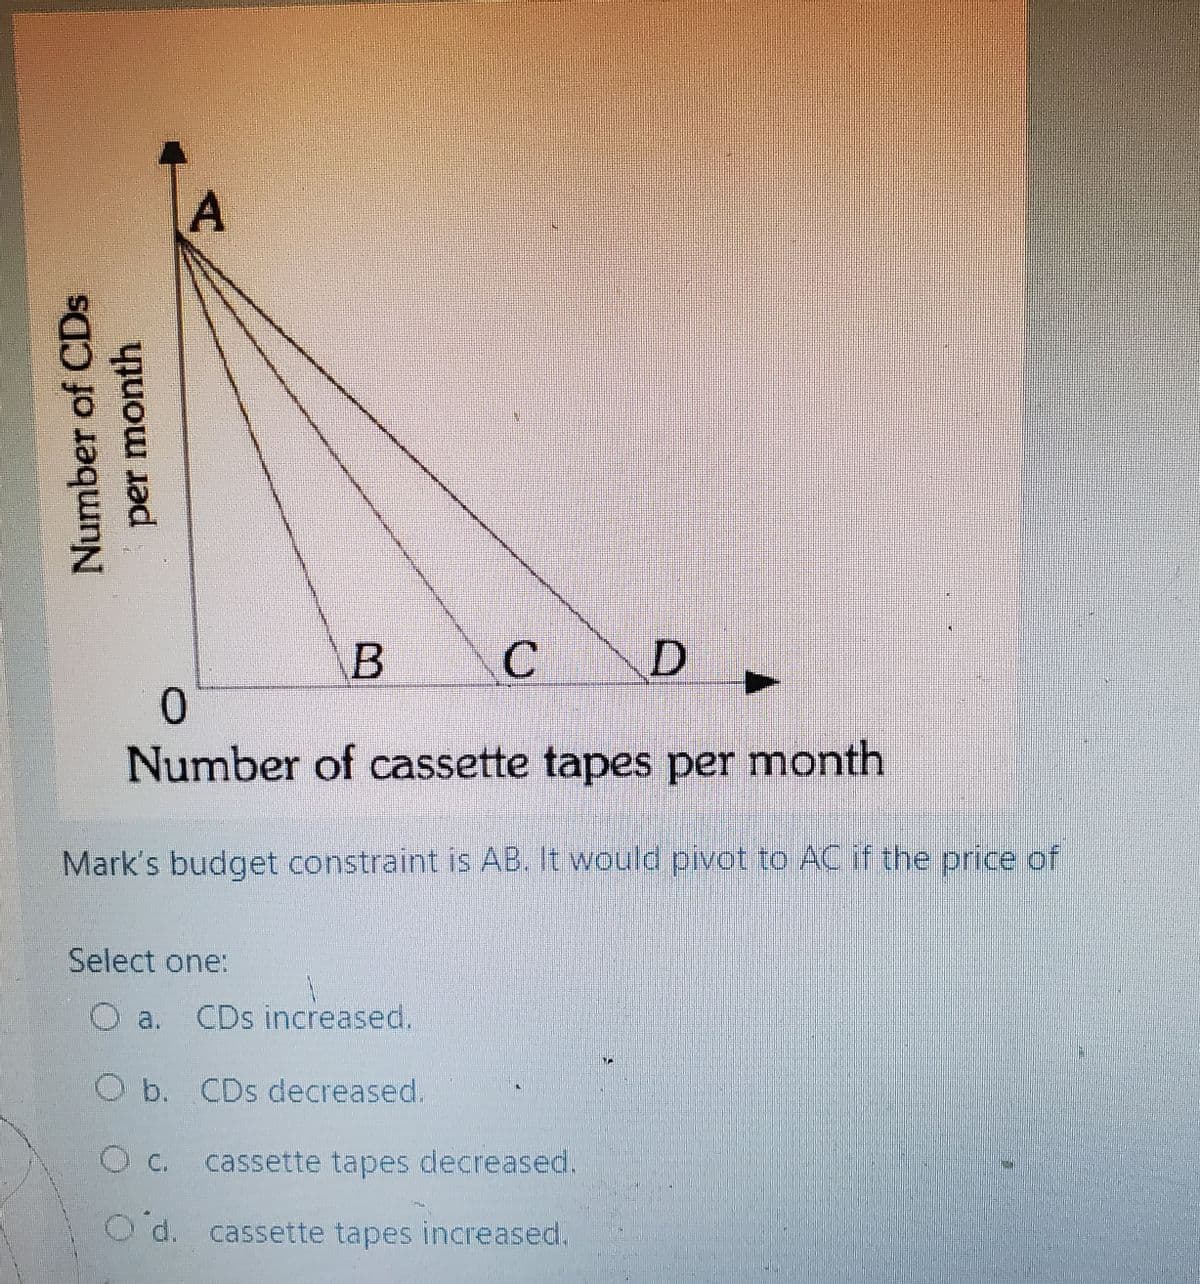 A
0.
Number of cassette tapes per month
Mark's budget constraint is AB. It would pivot to AC if the price of
Select one:
O a. CDs increased.
O b. CDs decreased.
O c. cassette tapes decreased.
O d. cassette tapes increased.
Number of CDs
month
per
